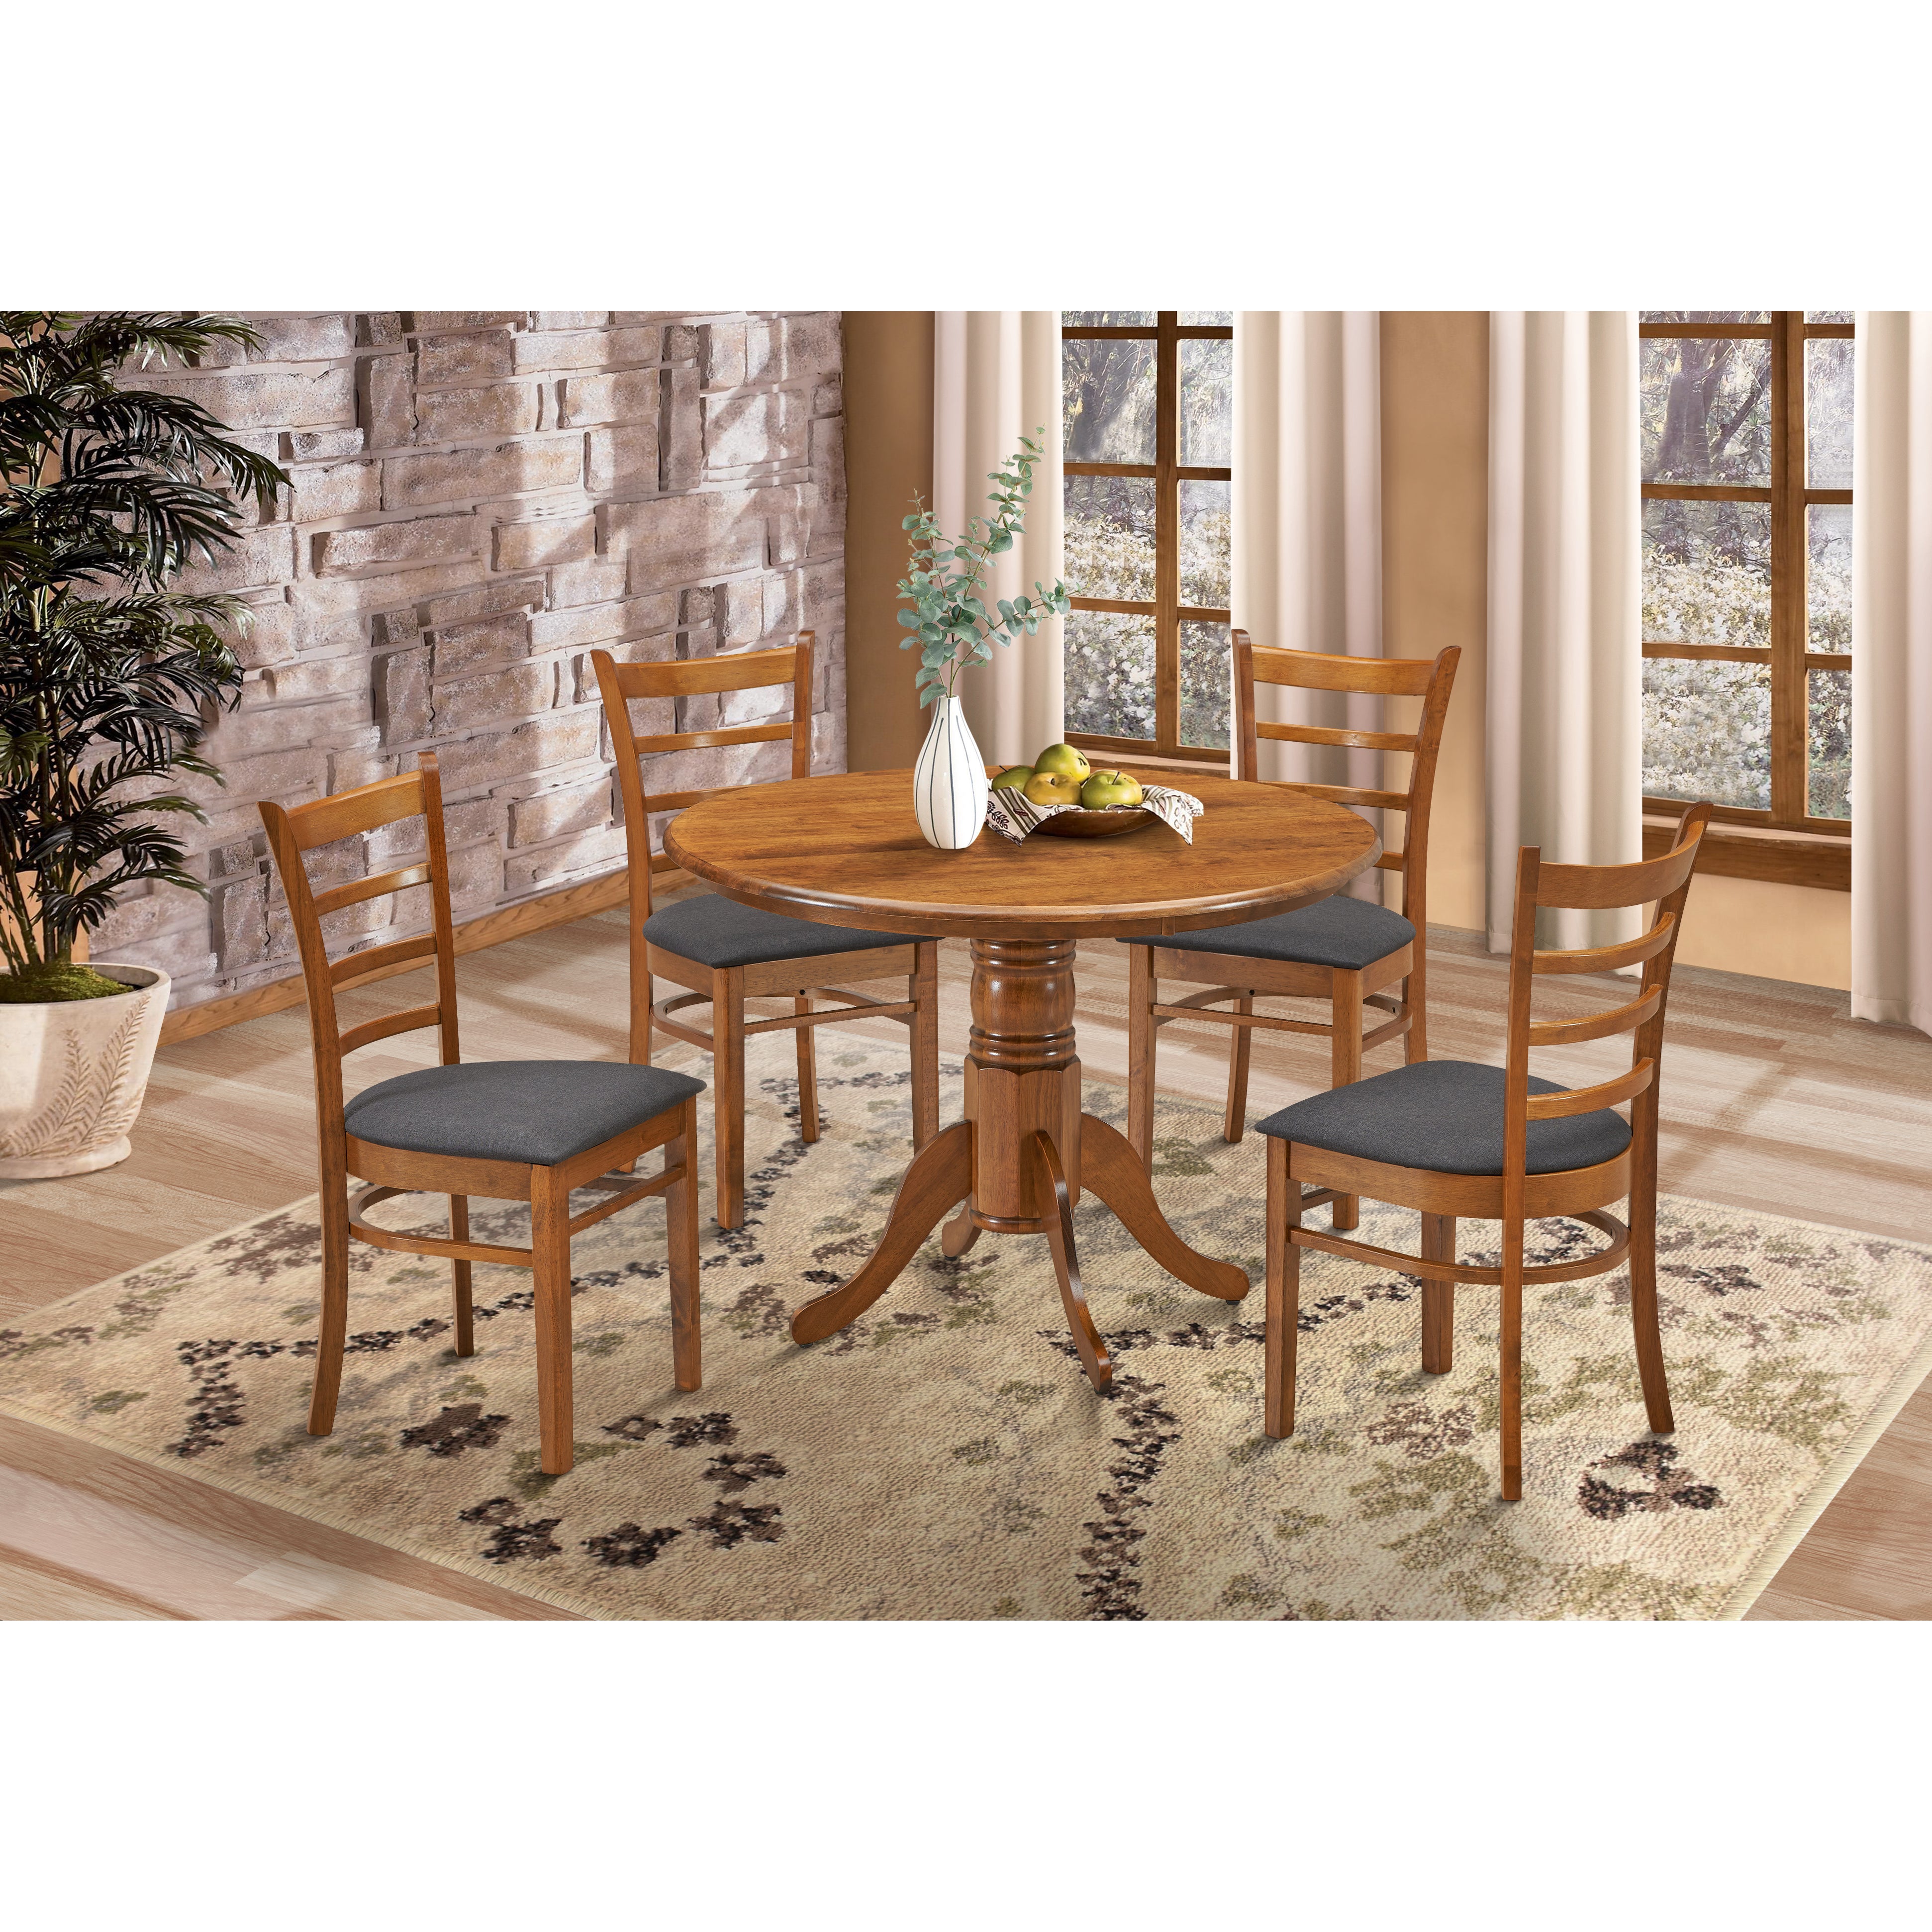 Linaria 5pc Dining Set 106cm Round Pedestral Table 4 Fabric Seat Chair - Walnut